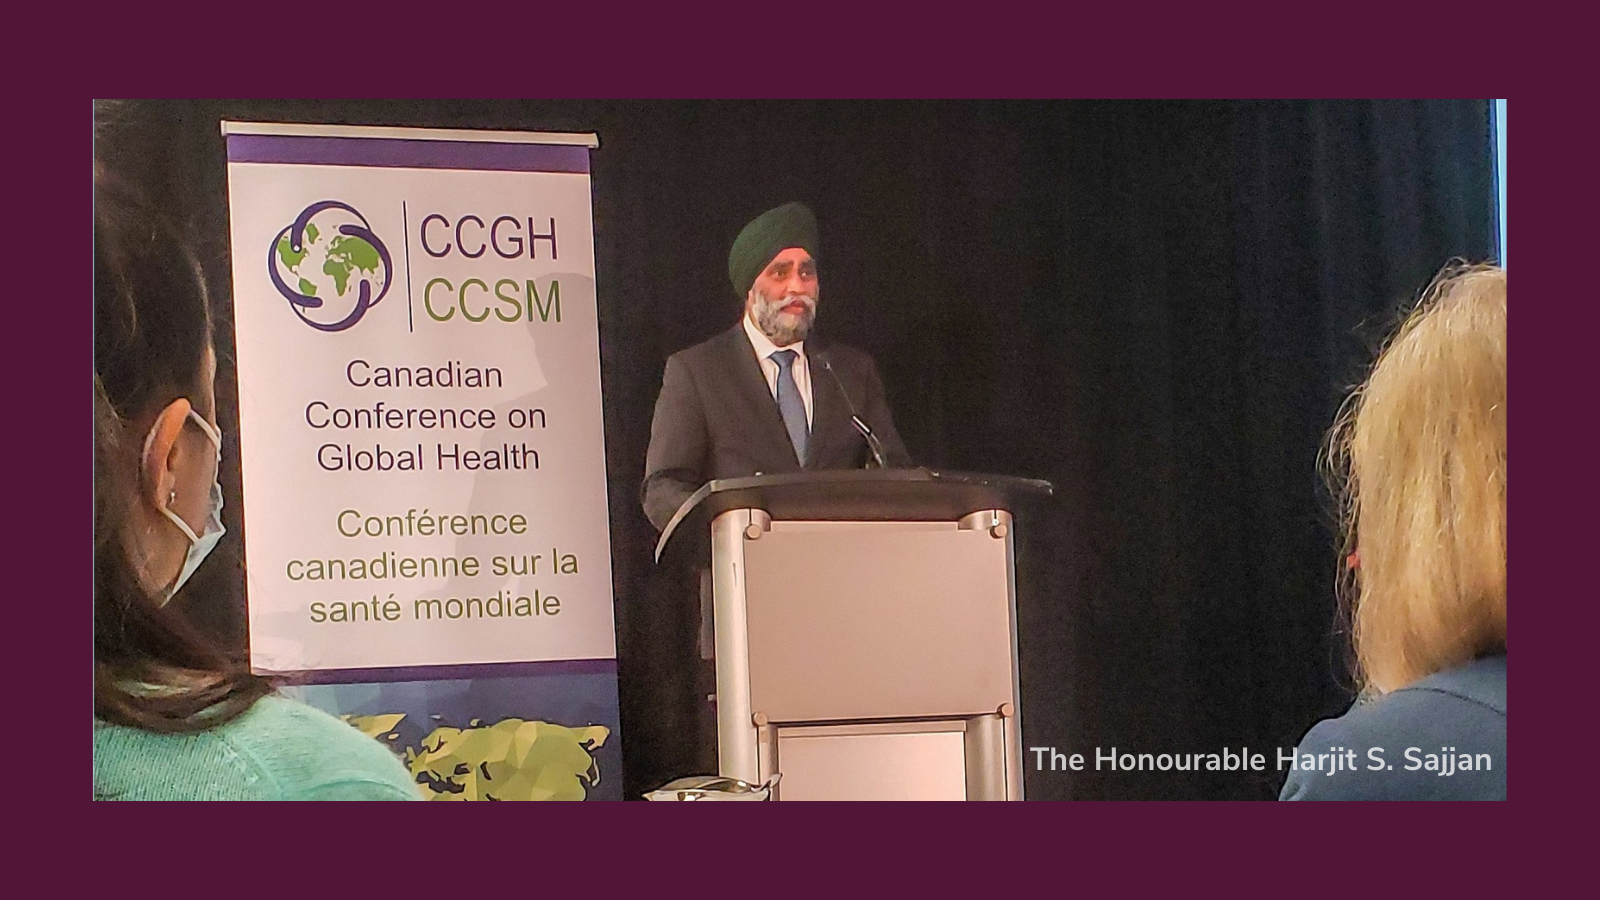 Minister Sajjan announces $325 million in funding for 11 projects with Canadian global health partners